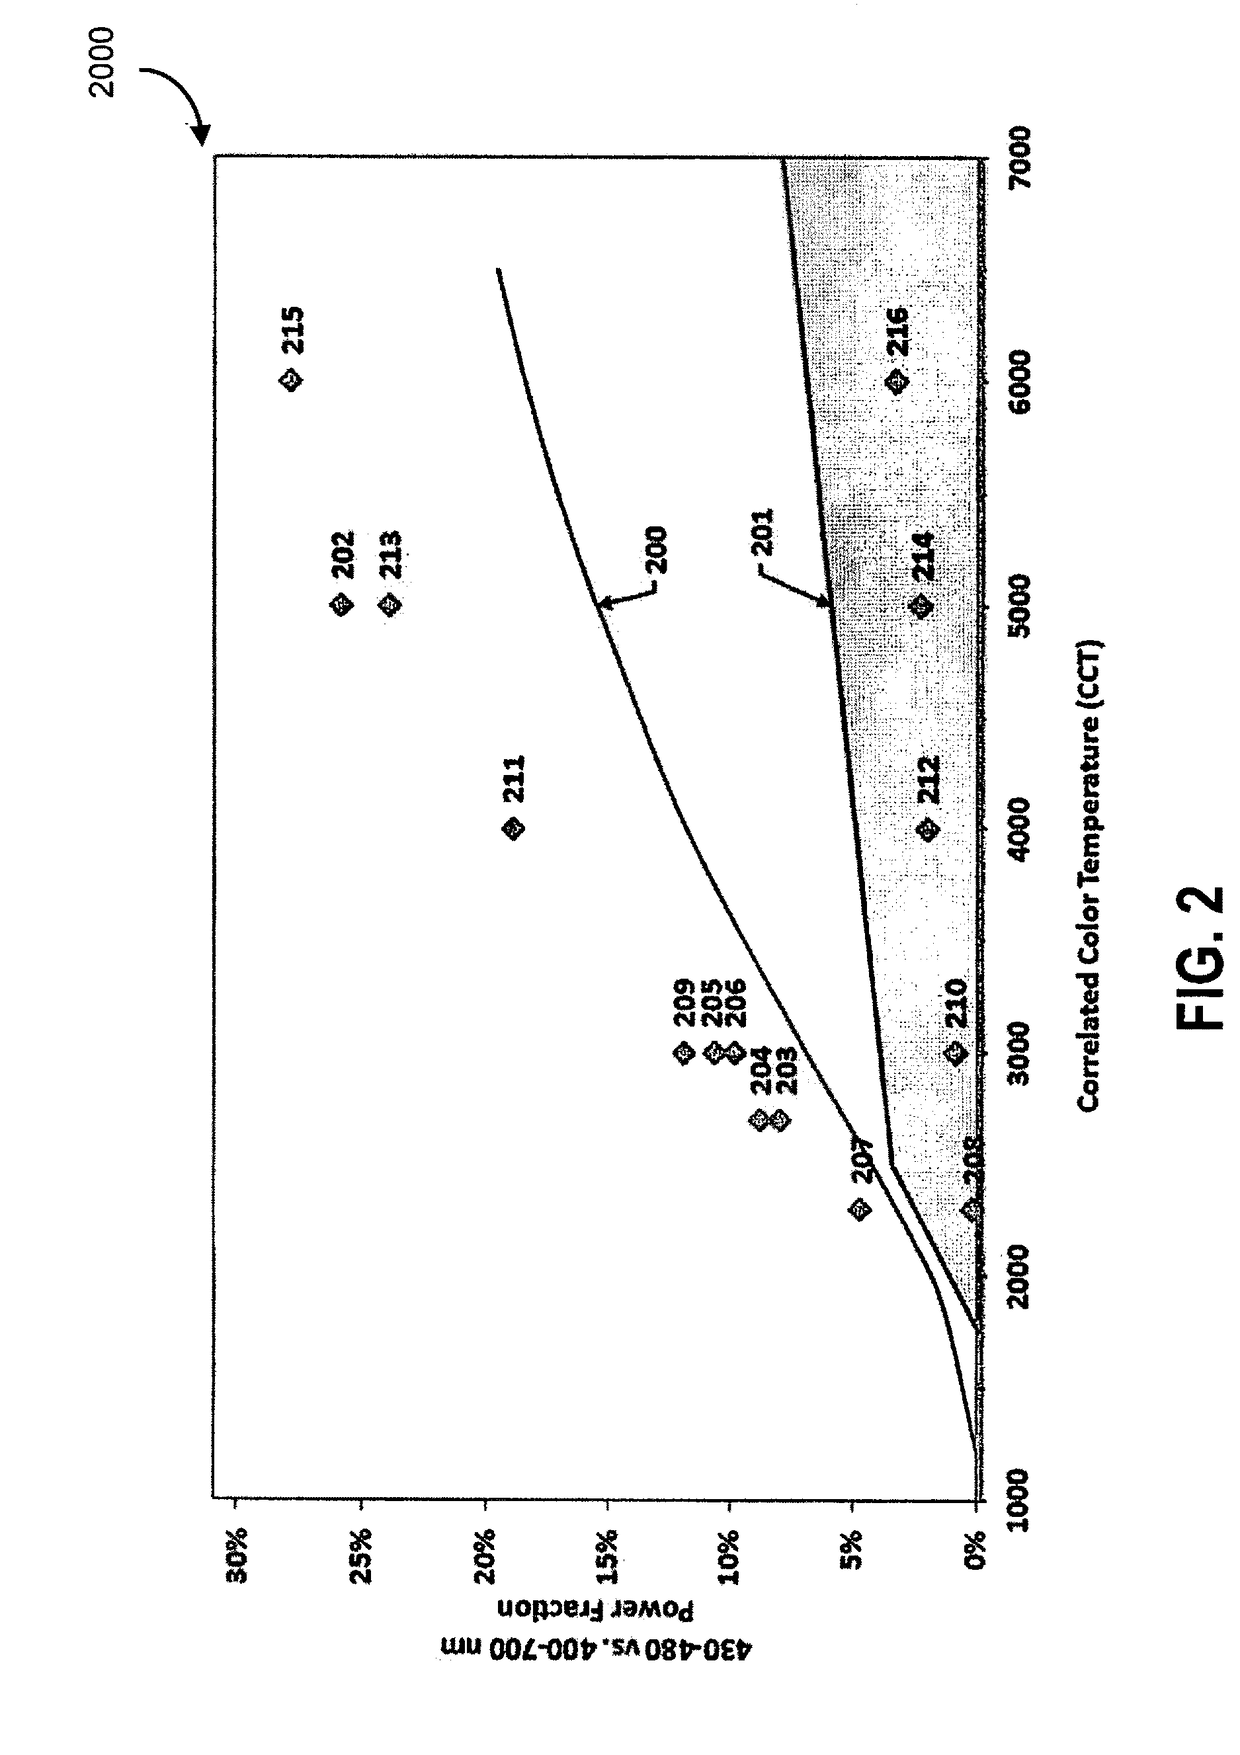 Systems and methods for controlling environmental illumination